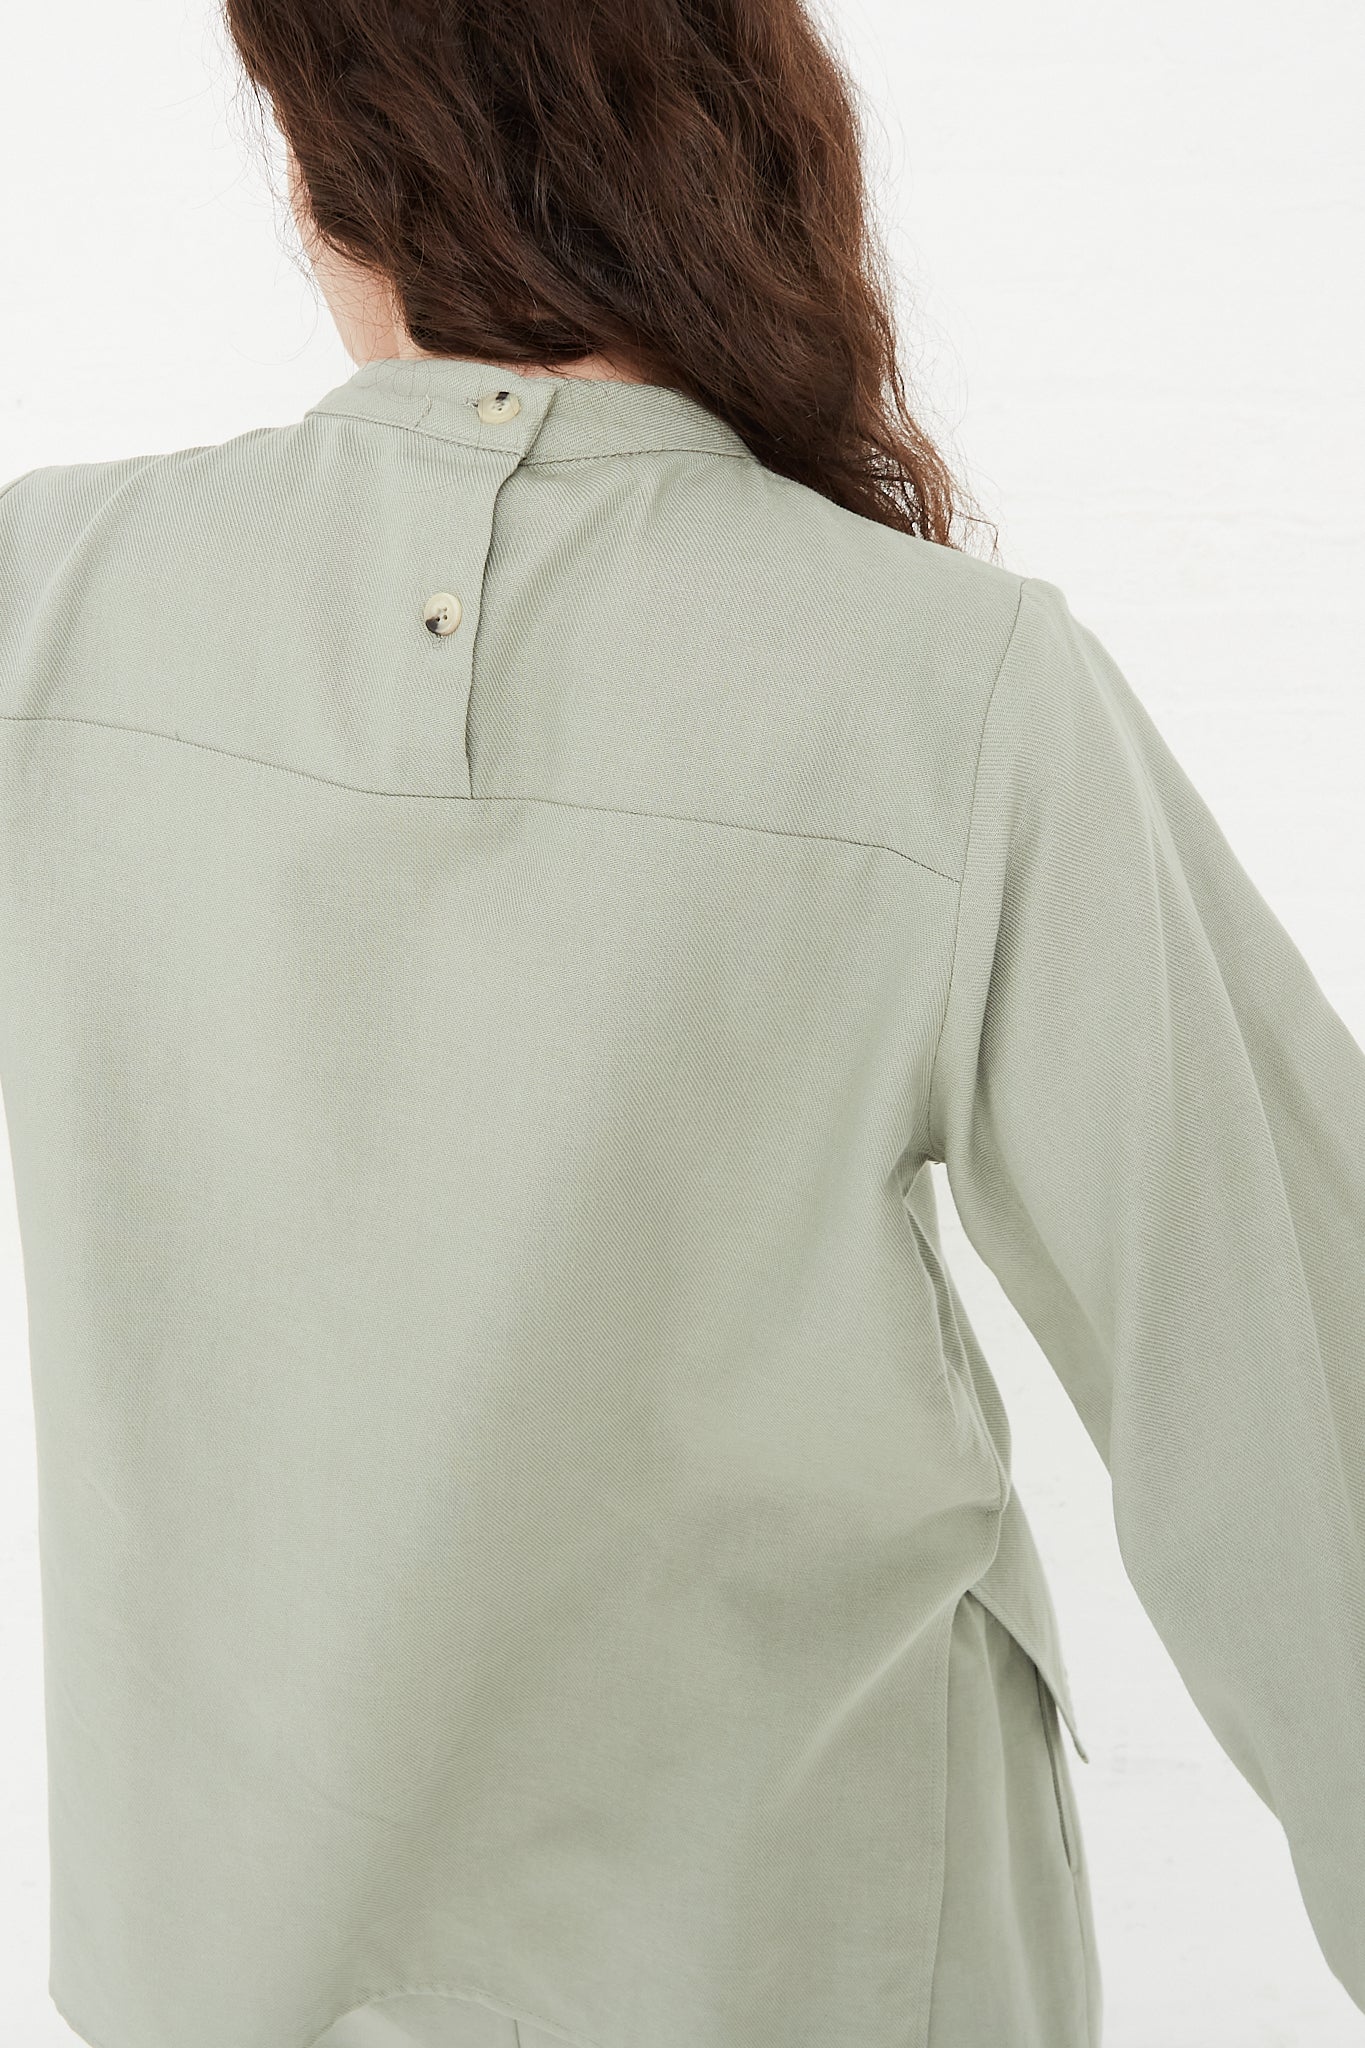 The back view of a woman wearing a Black Crane Cotton Twill Puff Sleeve Blouse in Agave. Up close view of back details.